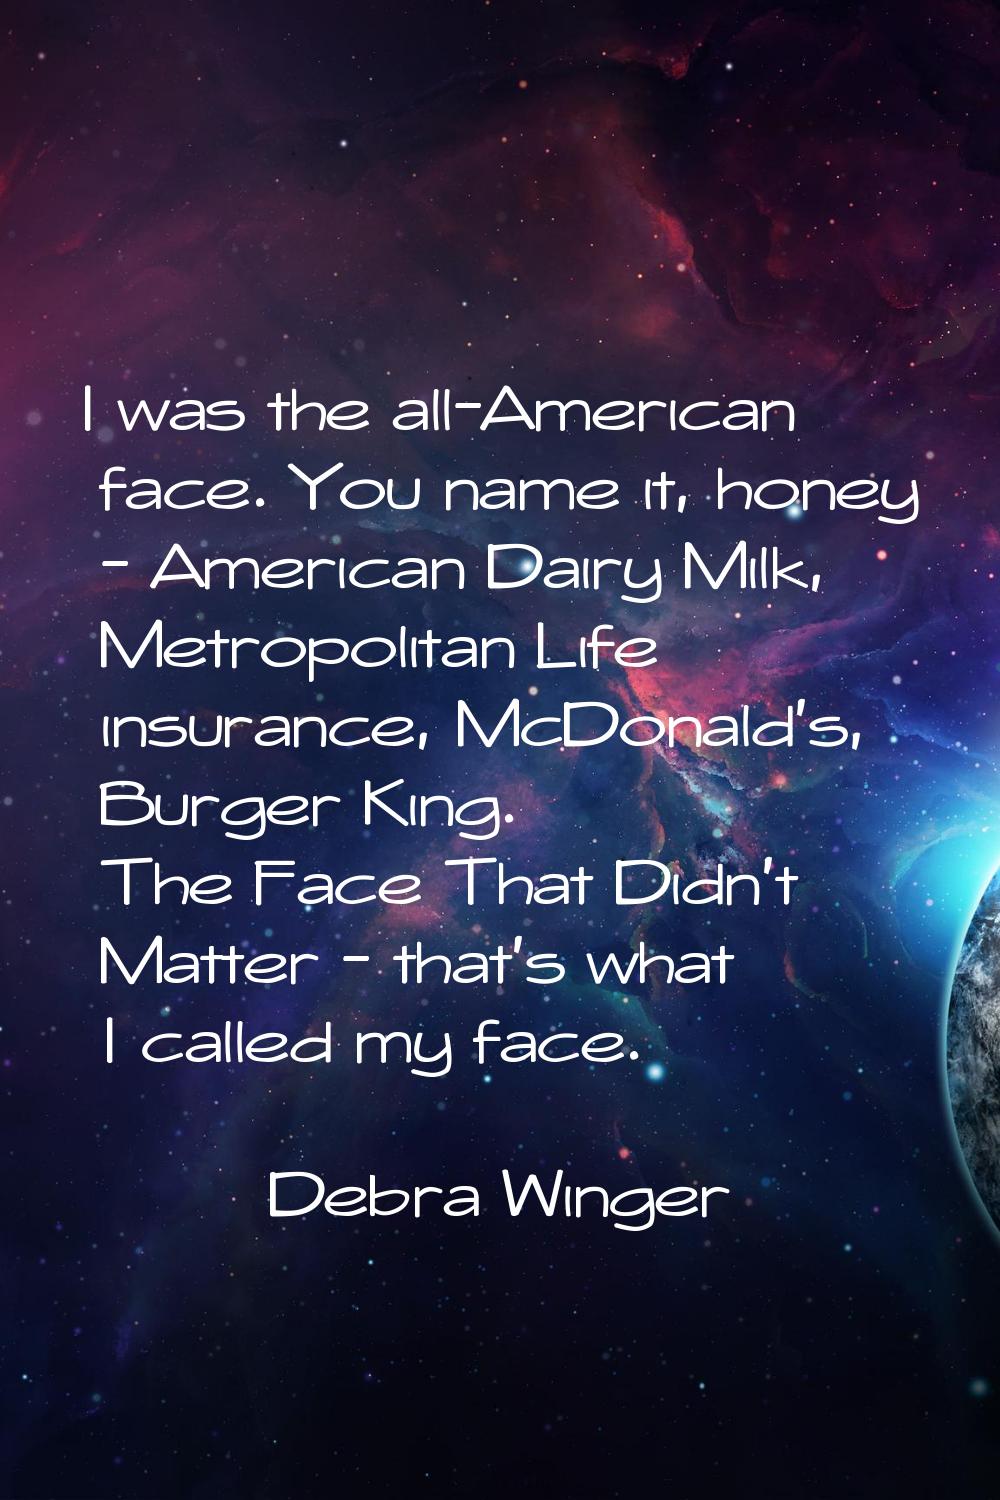 I was the all-American face. You name it, honey - American Dairy Milk, Metropolitan Life insurance,